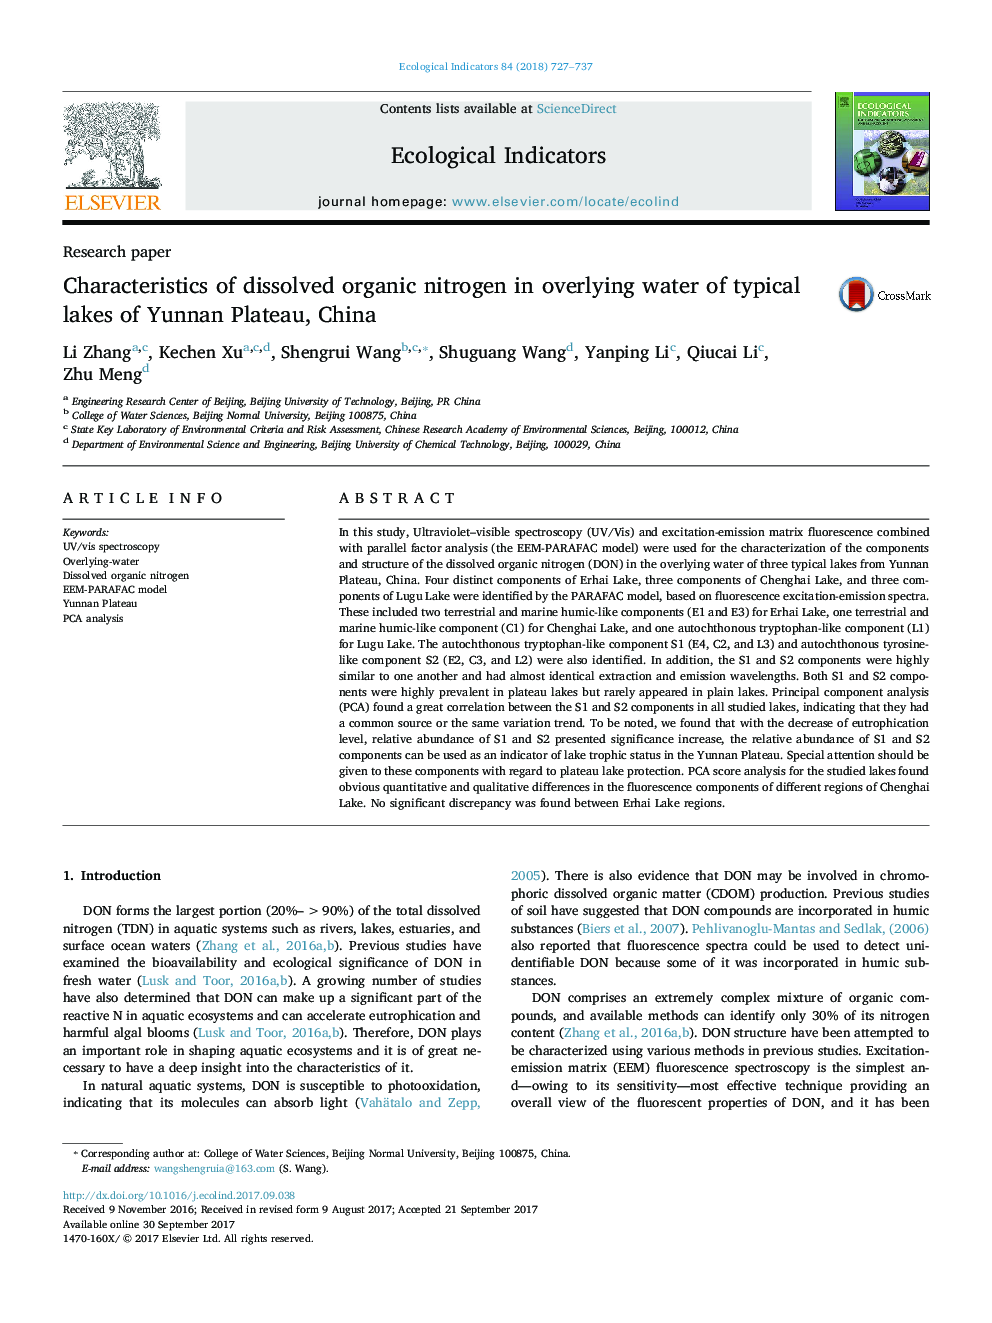 Research paperCharacteristics of dissolved organic nitrogen in overlying water of typical lakes of Yunnan Plateau, China